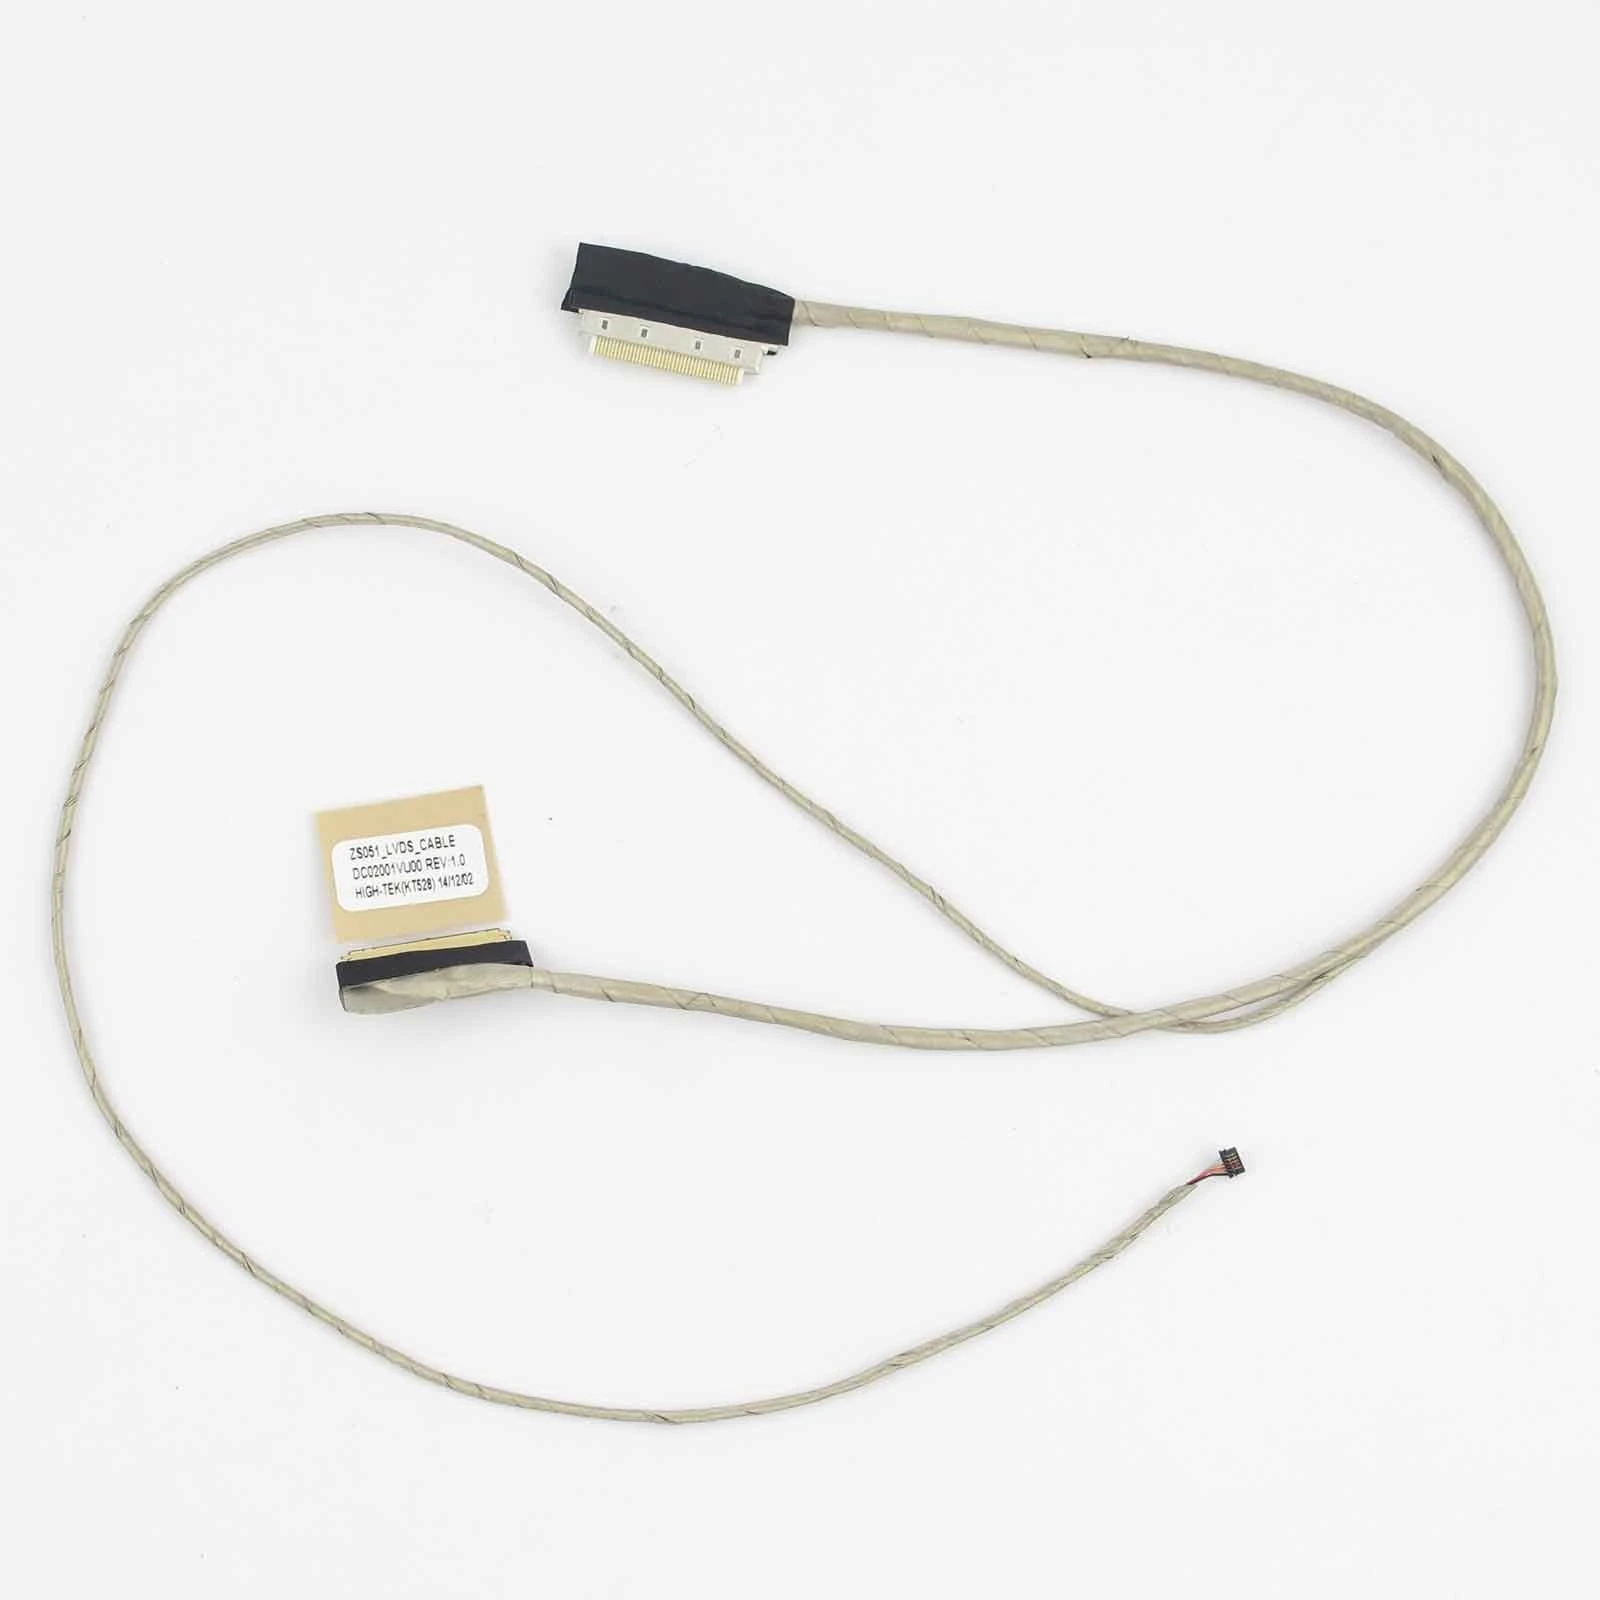 New LCD LVDS Video Cable for HP Pavilion 15-G 15-R 15-H 250 G3 DC02001VU00